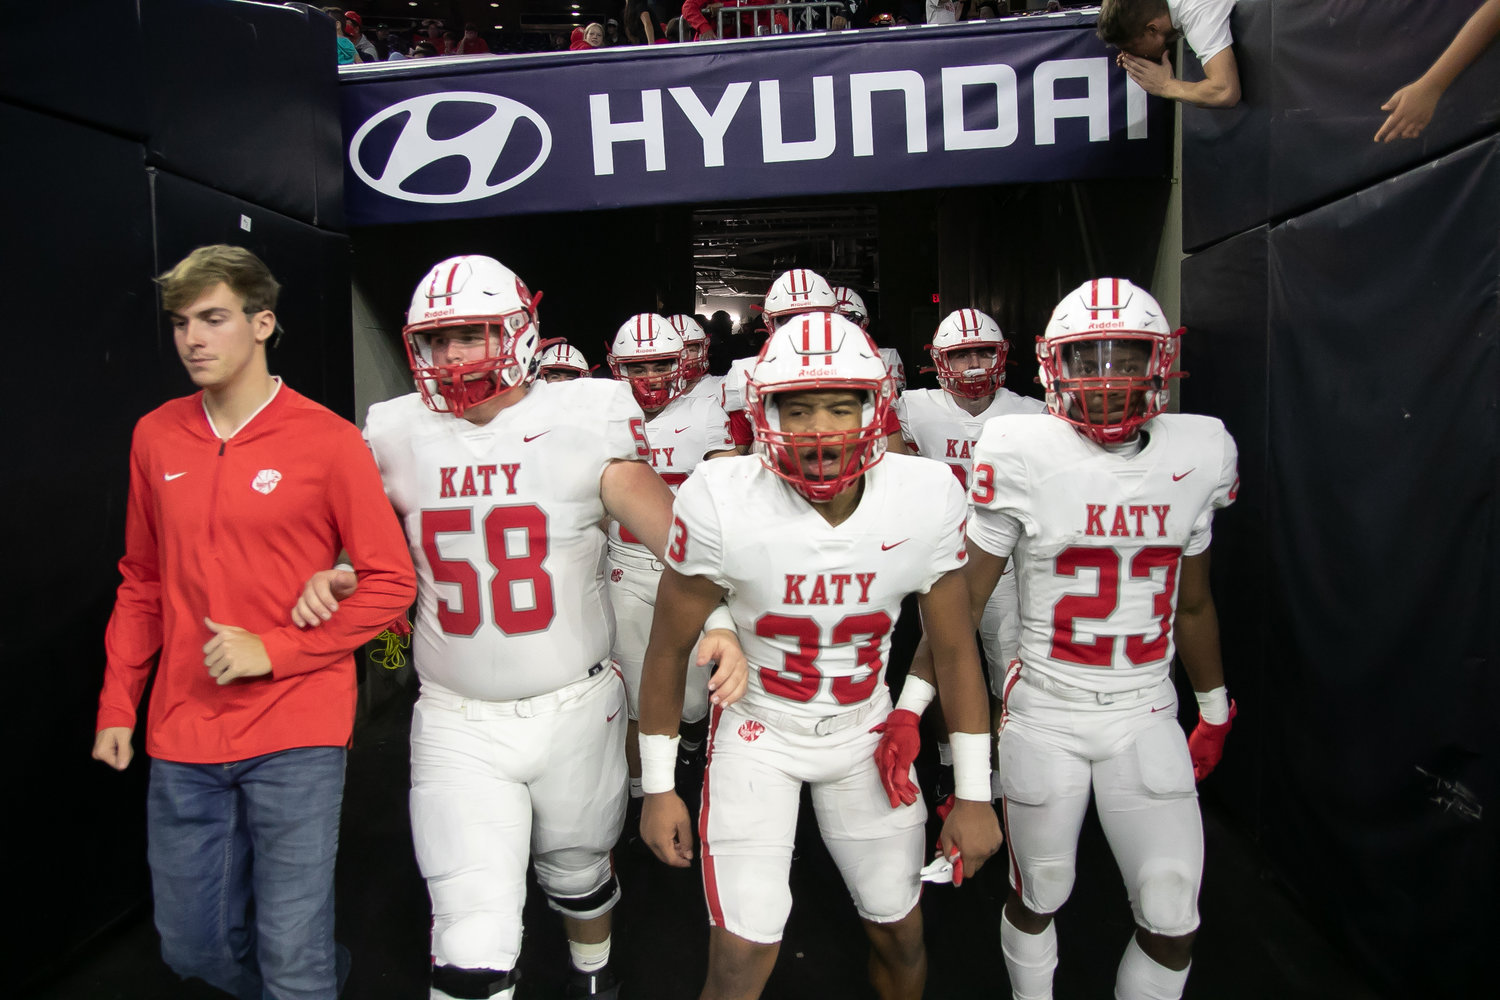 Katy players exit the tunnel and head onto the field before Friday's Class 6A-Division II Region III Final between Katy and C.E. King at NRG Stadium.